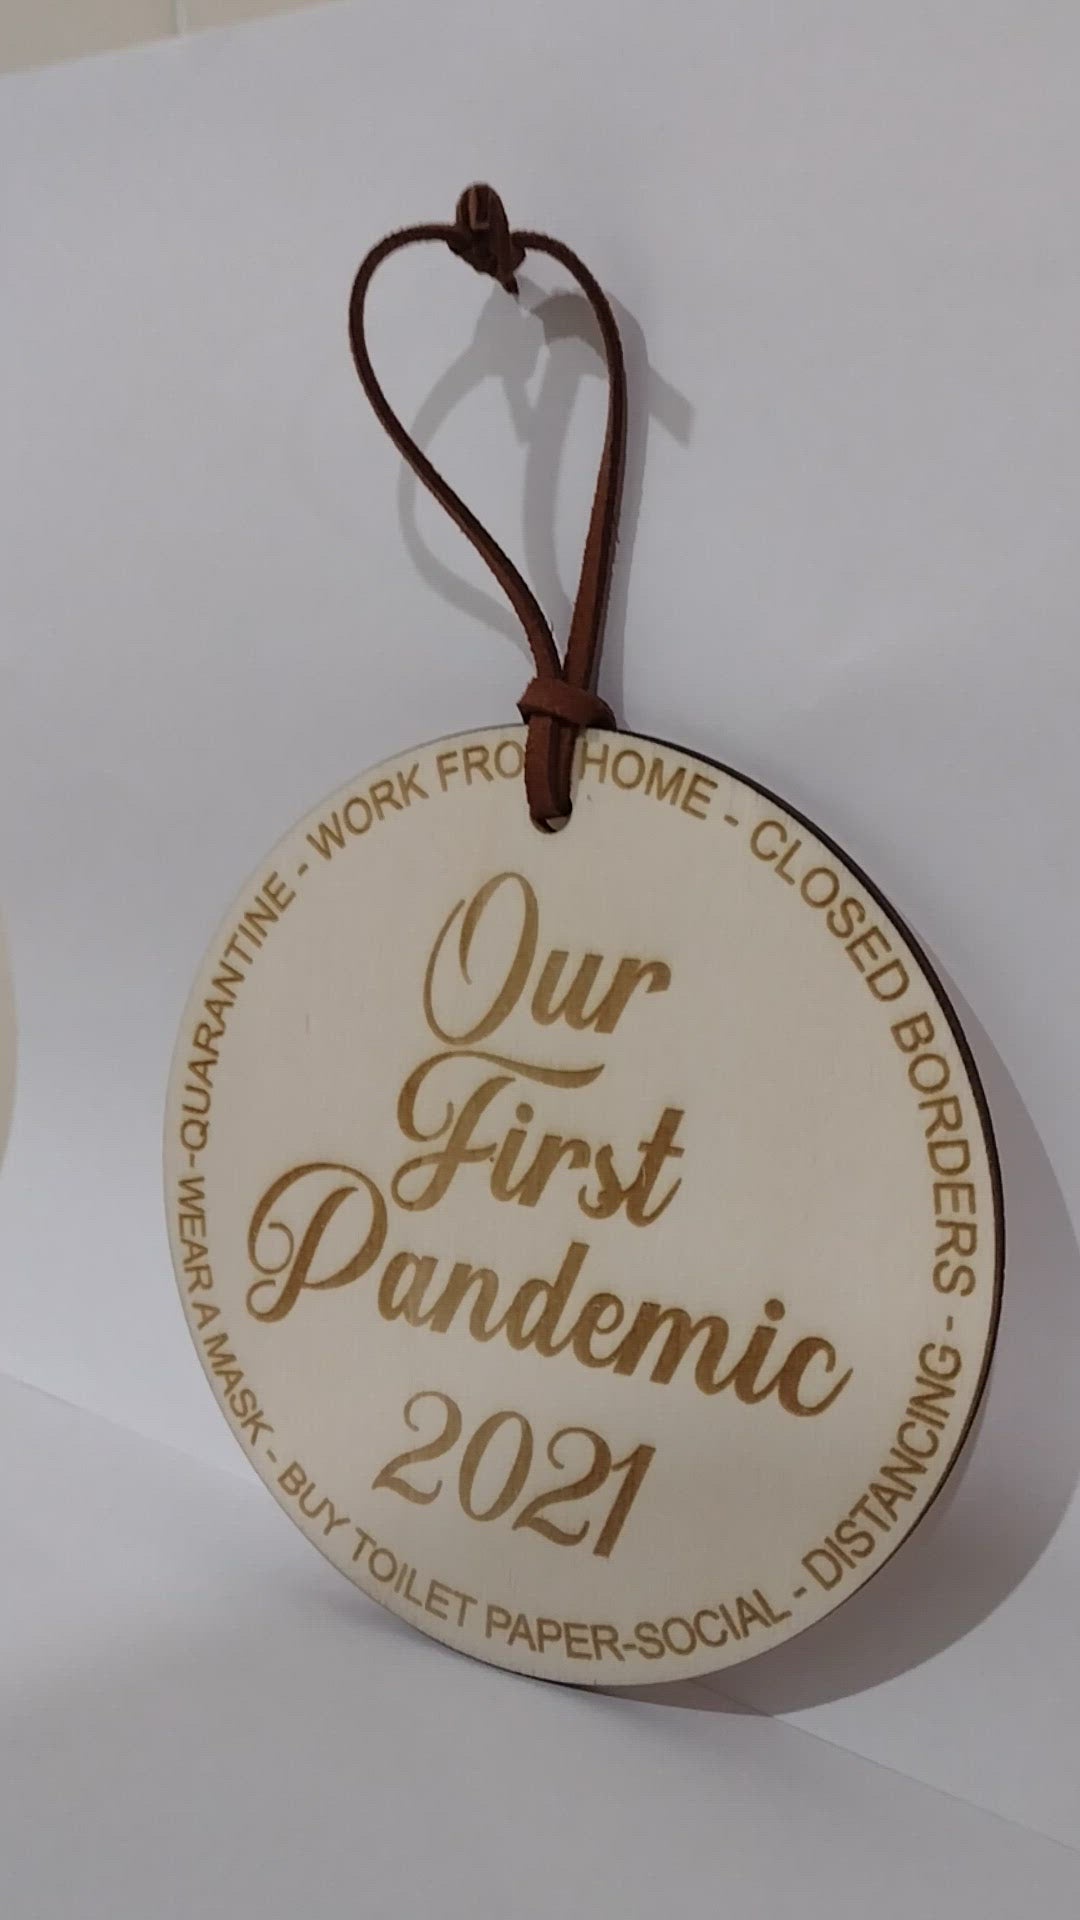 Our First Pandemic 2021 Ornament Christmas Decoration